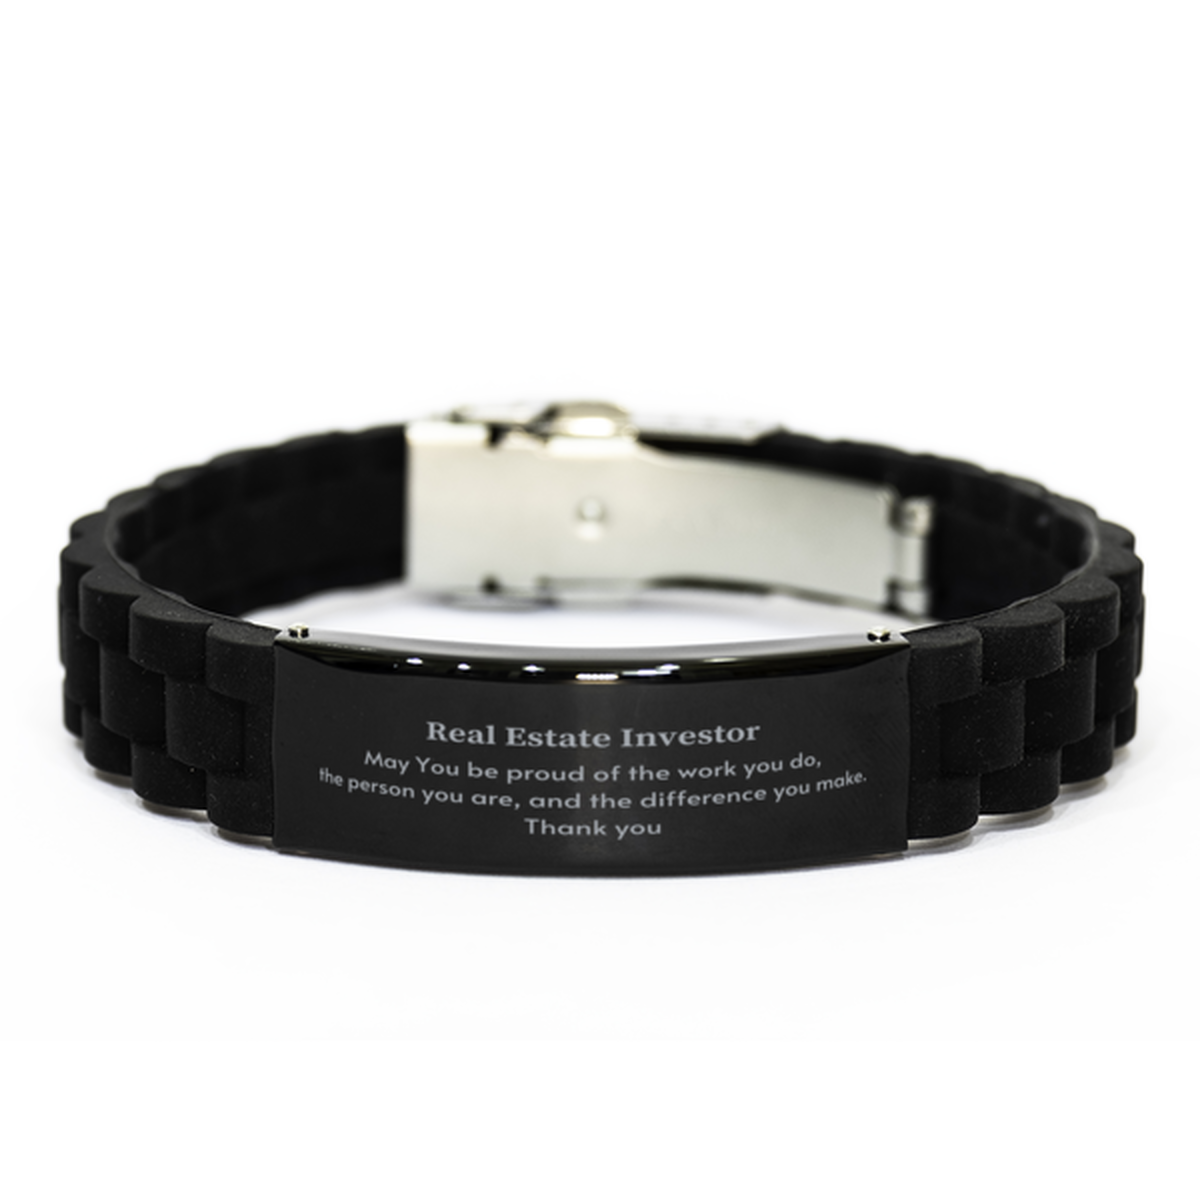 Heartwarming Black Glidelock Clasp Bracelet Retirement Coworkers Gifts for Real Estate Investor, Real Estate Investor May You be proud of the work you do, the person you are Gifts for Boss Men Women Friends